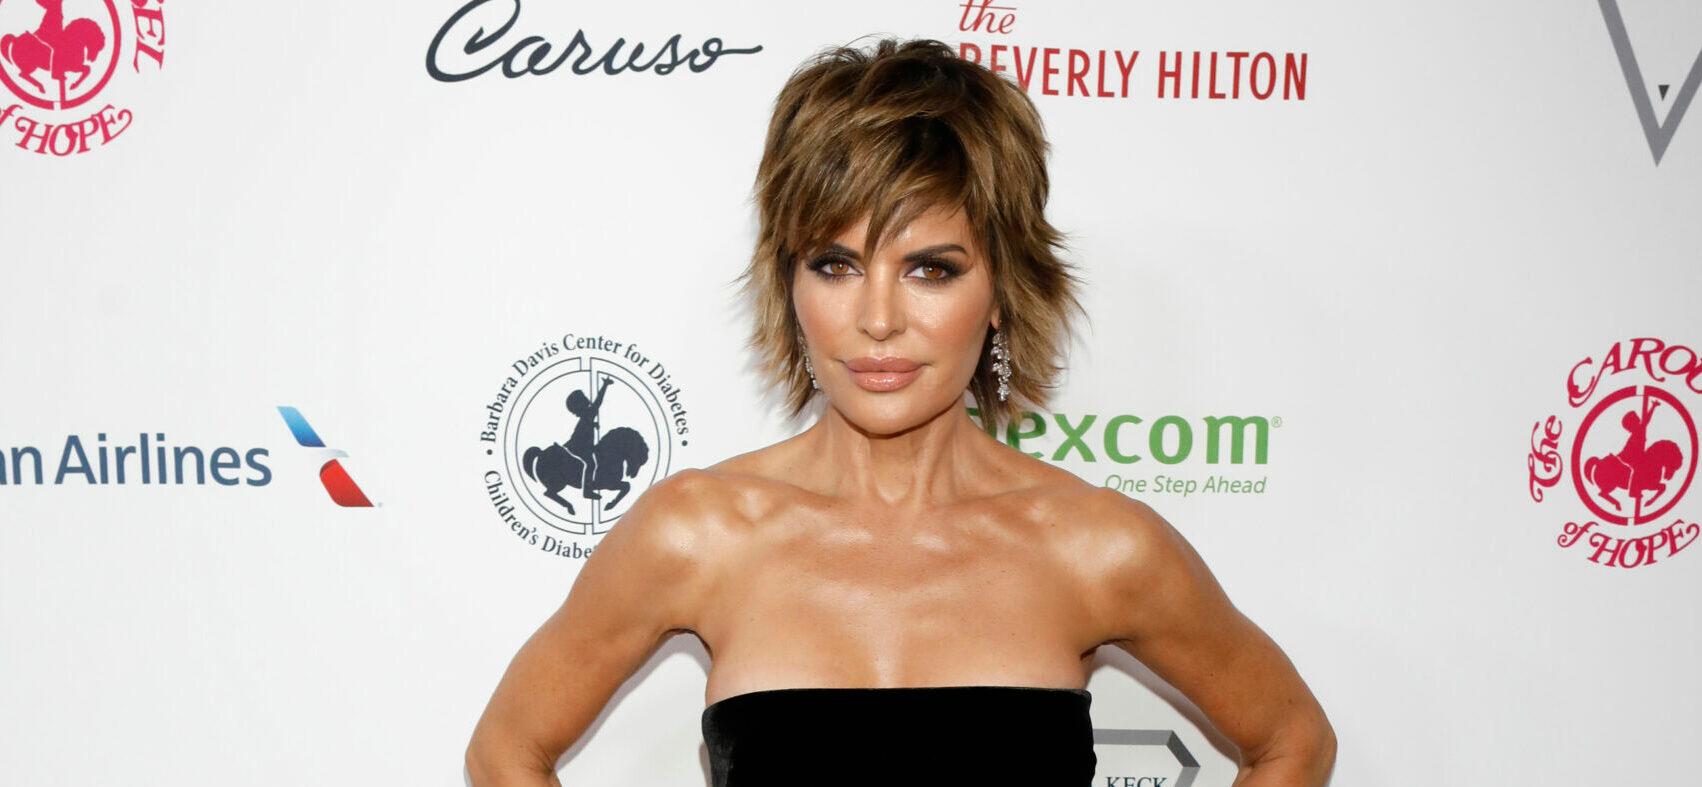 Lisa Rinna Speaks Out About $1.2 Million Lawsuit Over Posting Paparazzi Photos